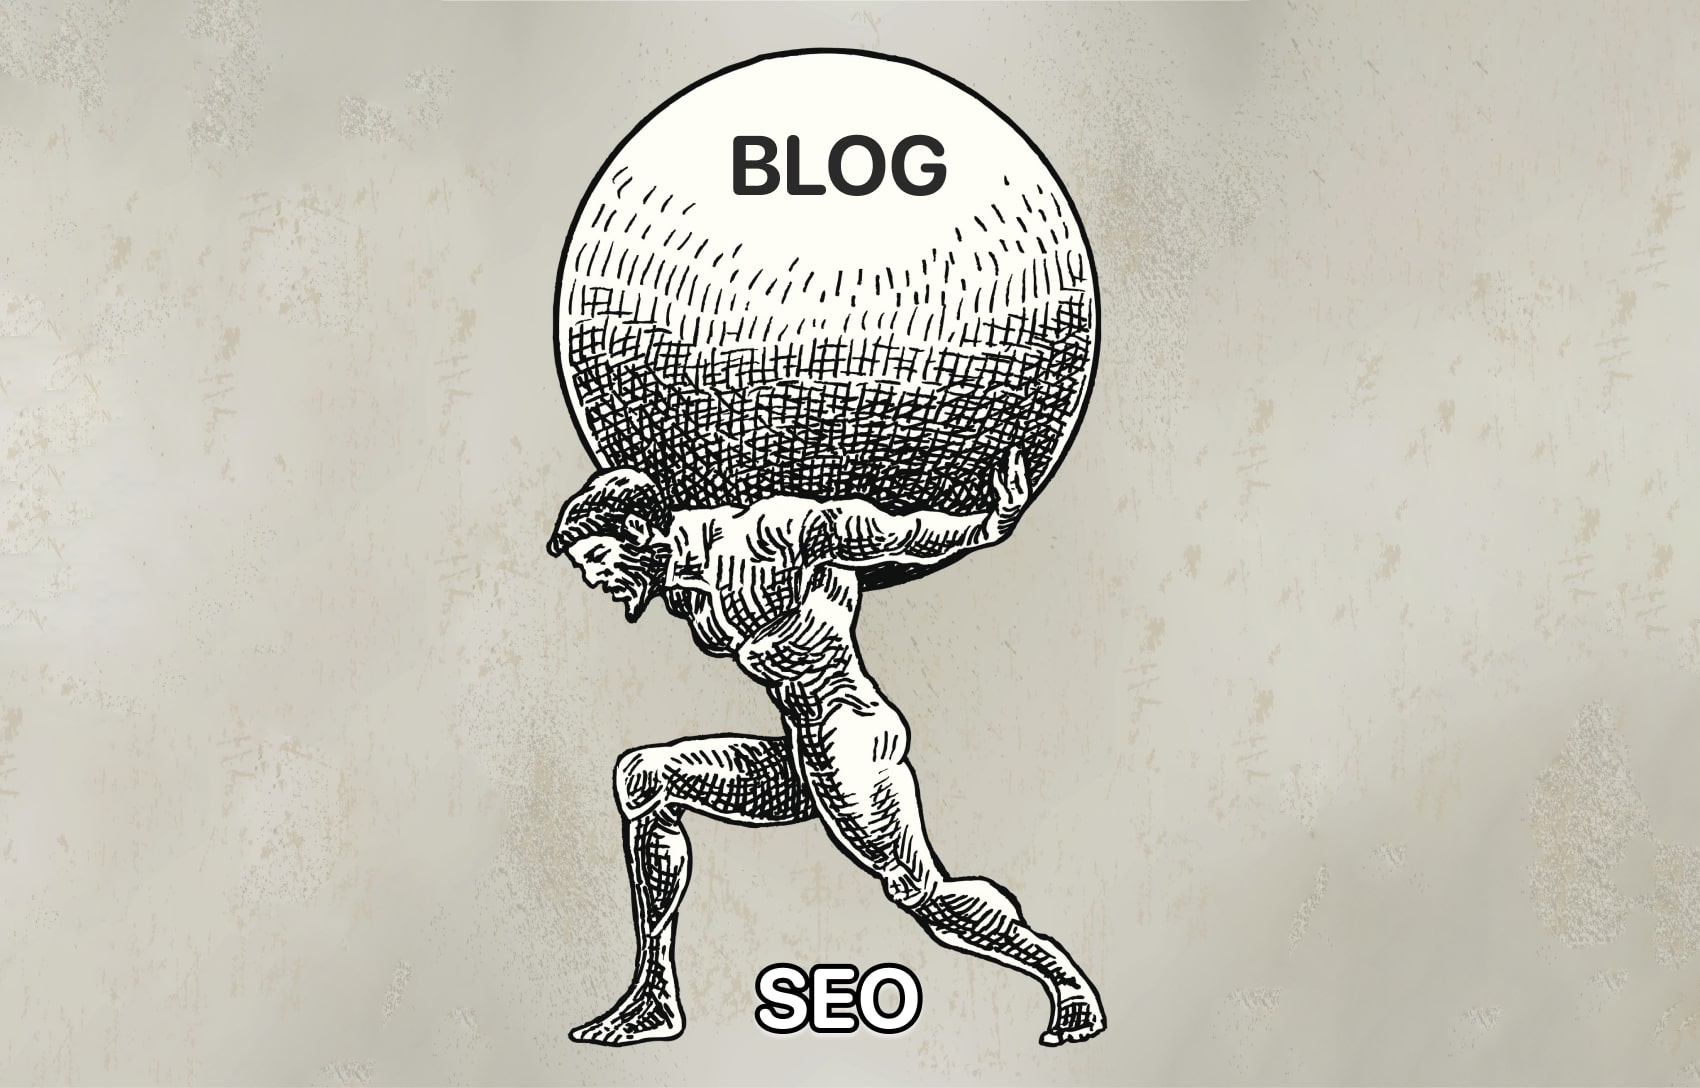 How blog and SEO are interconnected